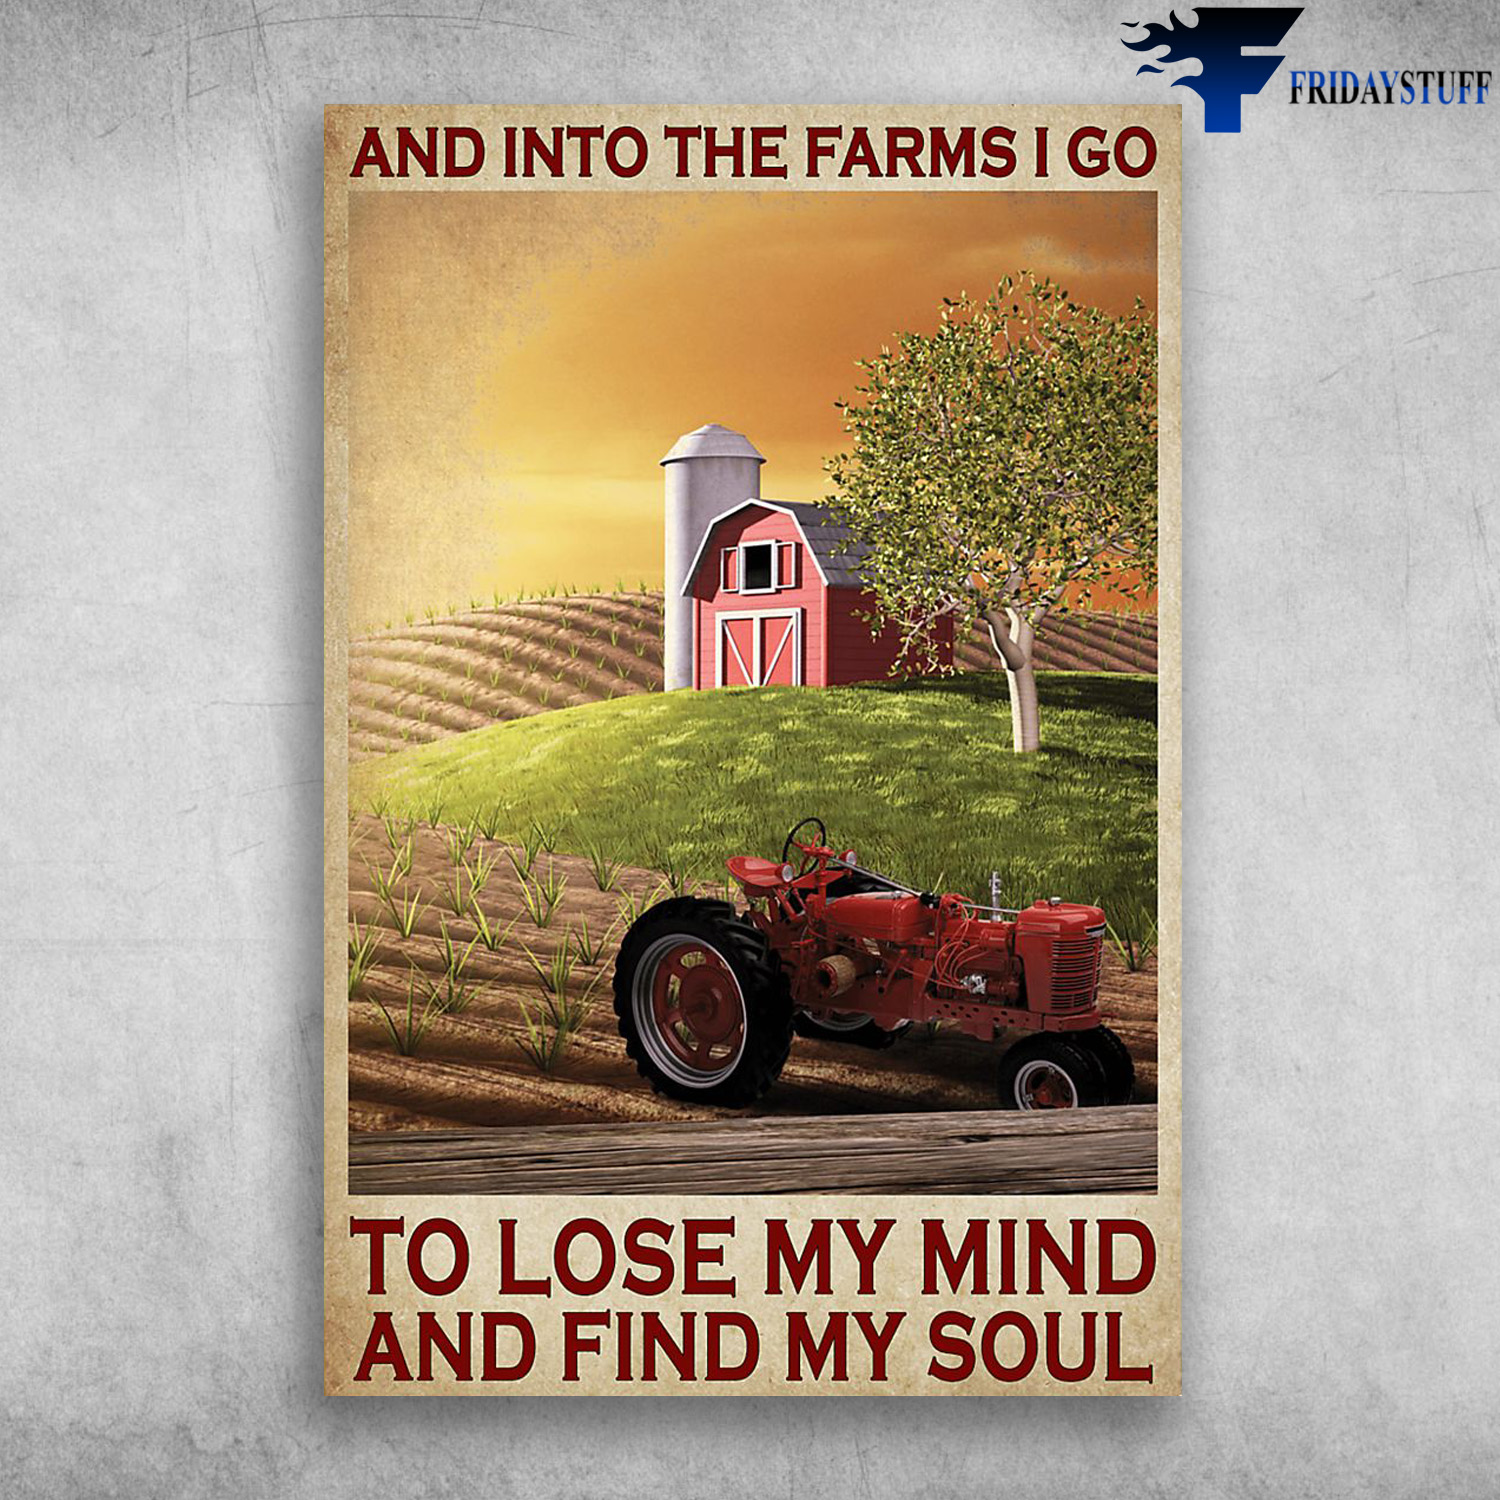 Tractor On The Farm - And Into The Farms I Go, To Lose My Mind, And Find My Soul